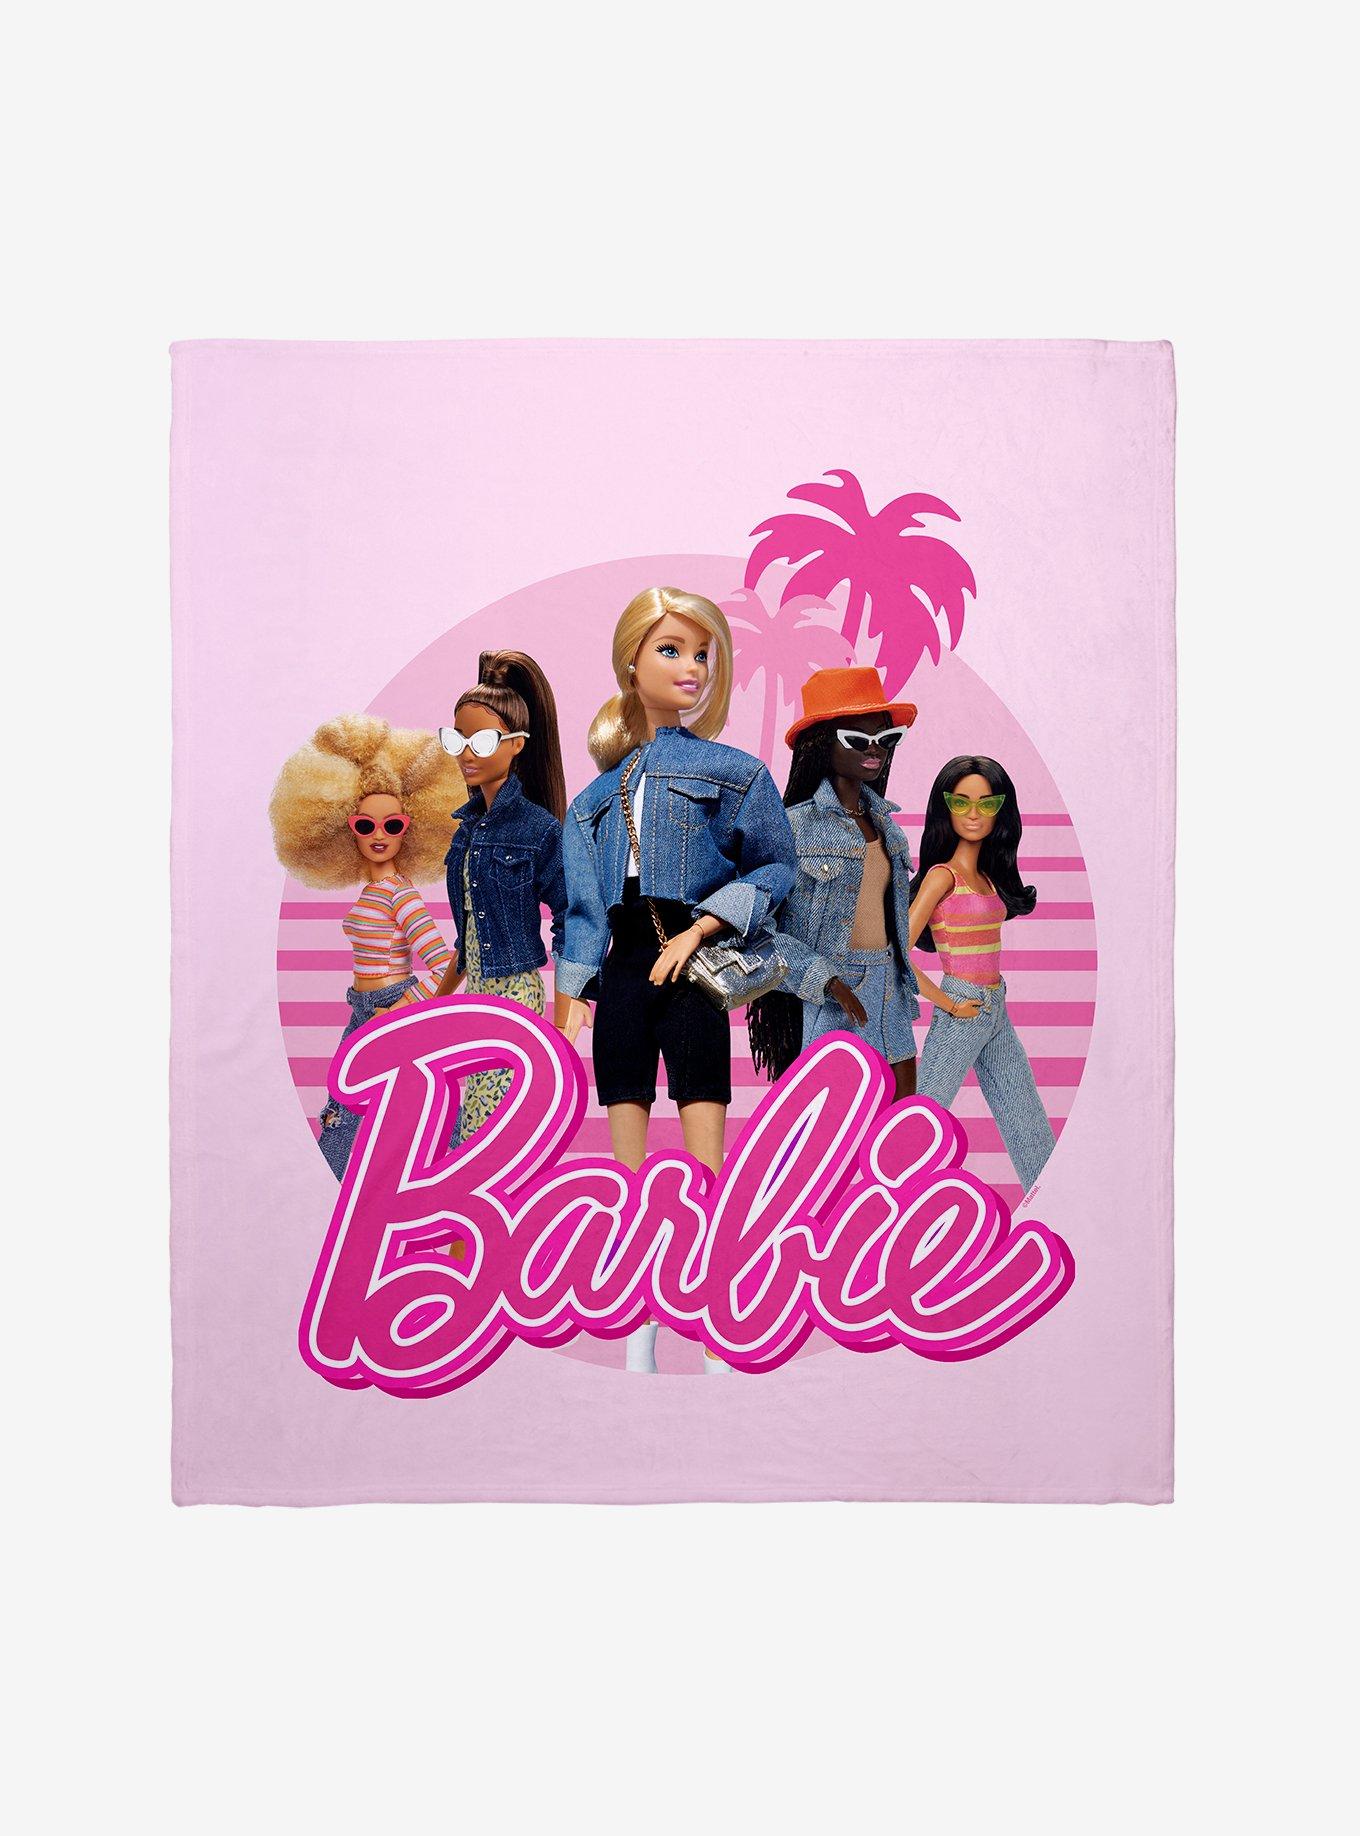 Vintage Barbie in the City Woven Tapestry Throw Blanket for Sale